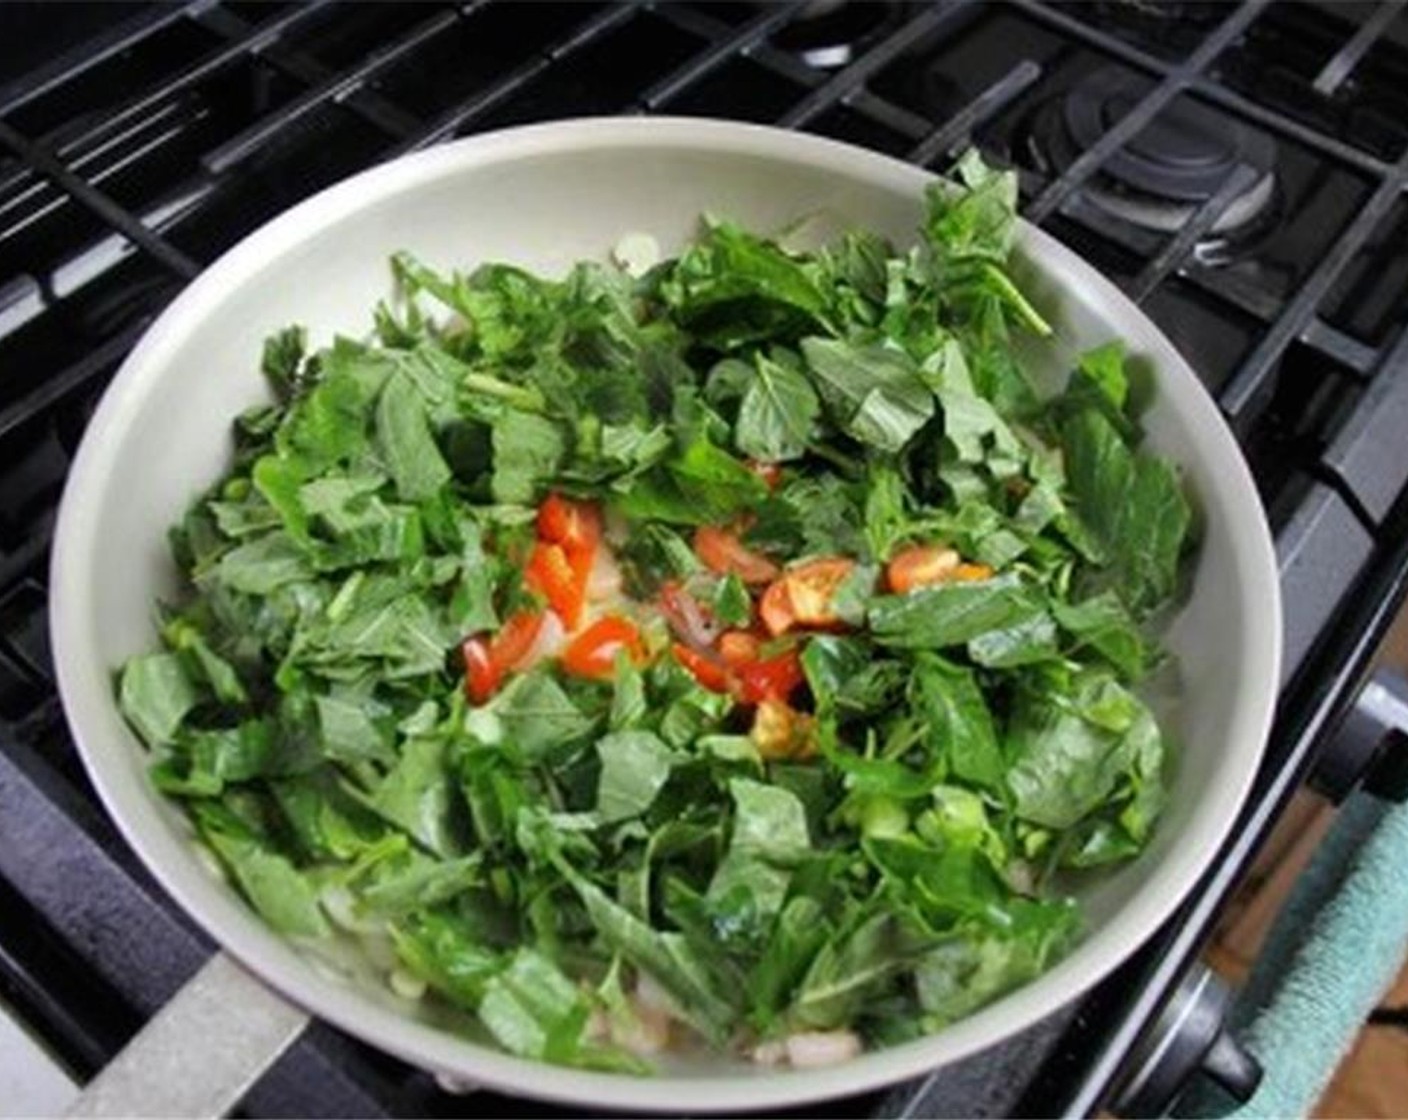 step 3 Turn the heat up to medium high and add the Jamaican Callaloo (30 cups), Tomato (1), Scotch Bonnet Pepper (1/4), Fresh Thyme (2 sprigs), and Sea Salt (1/4 tsp). After a couple minutes, add the Water (1/2 cup) and cook until tender.